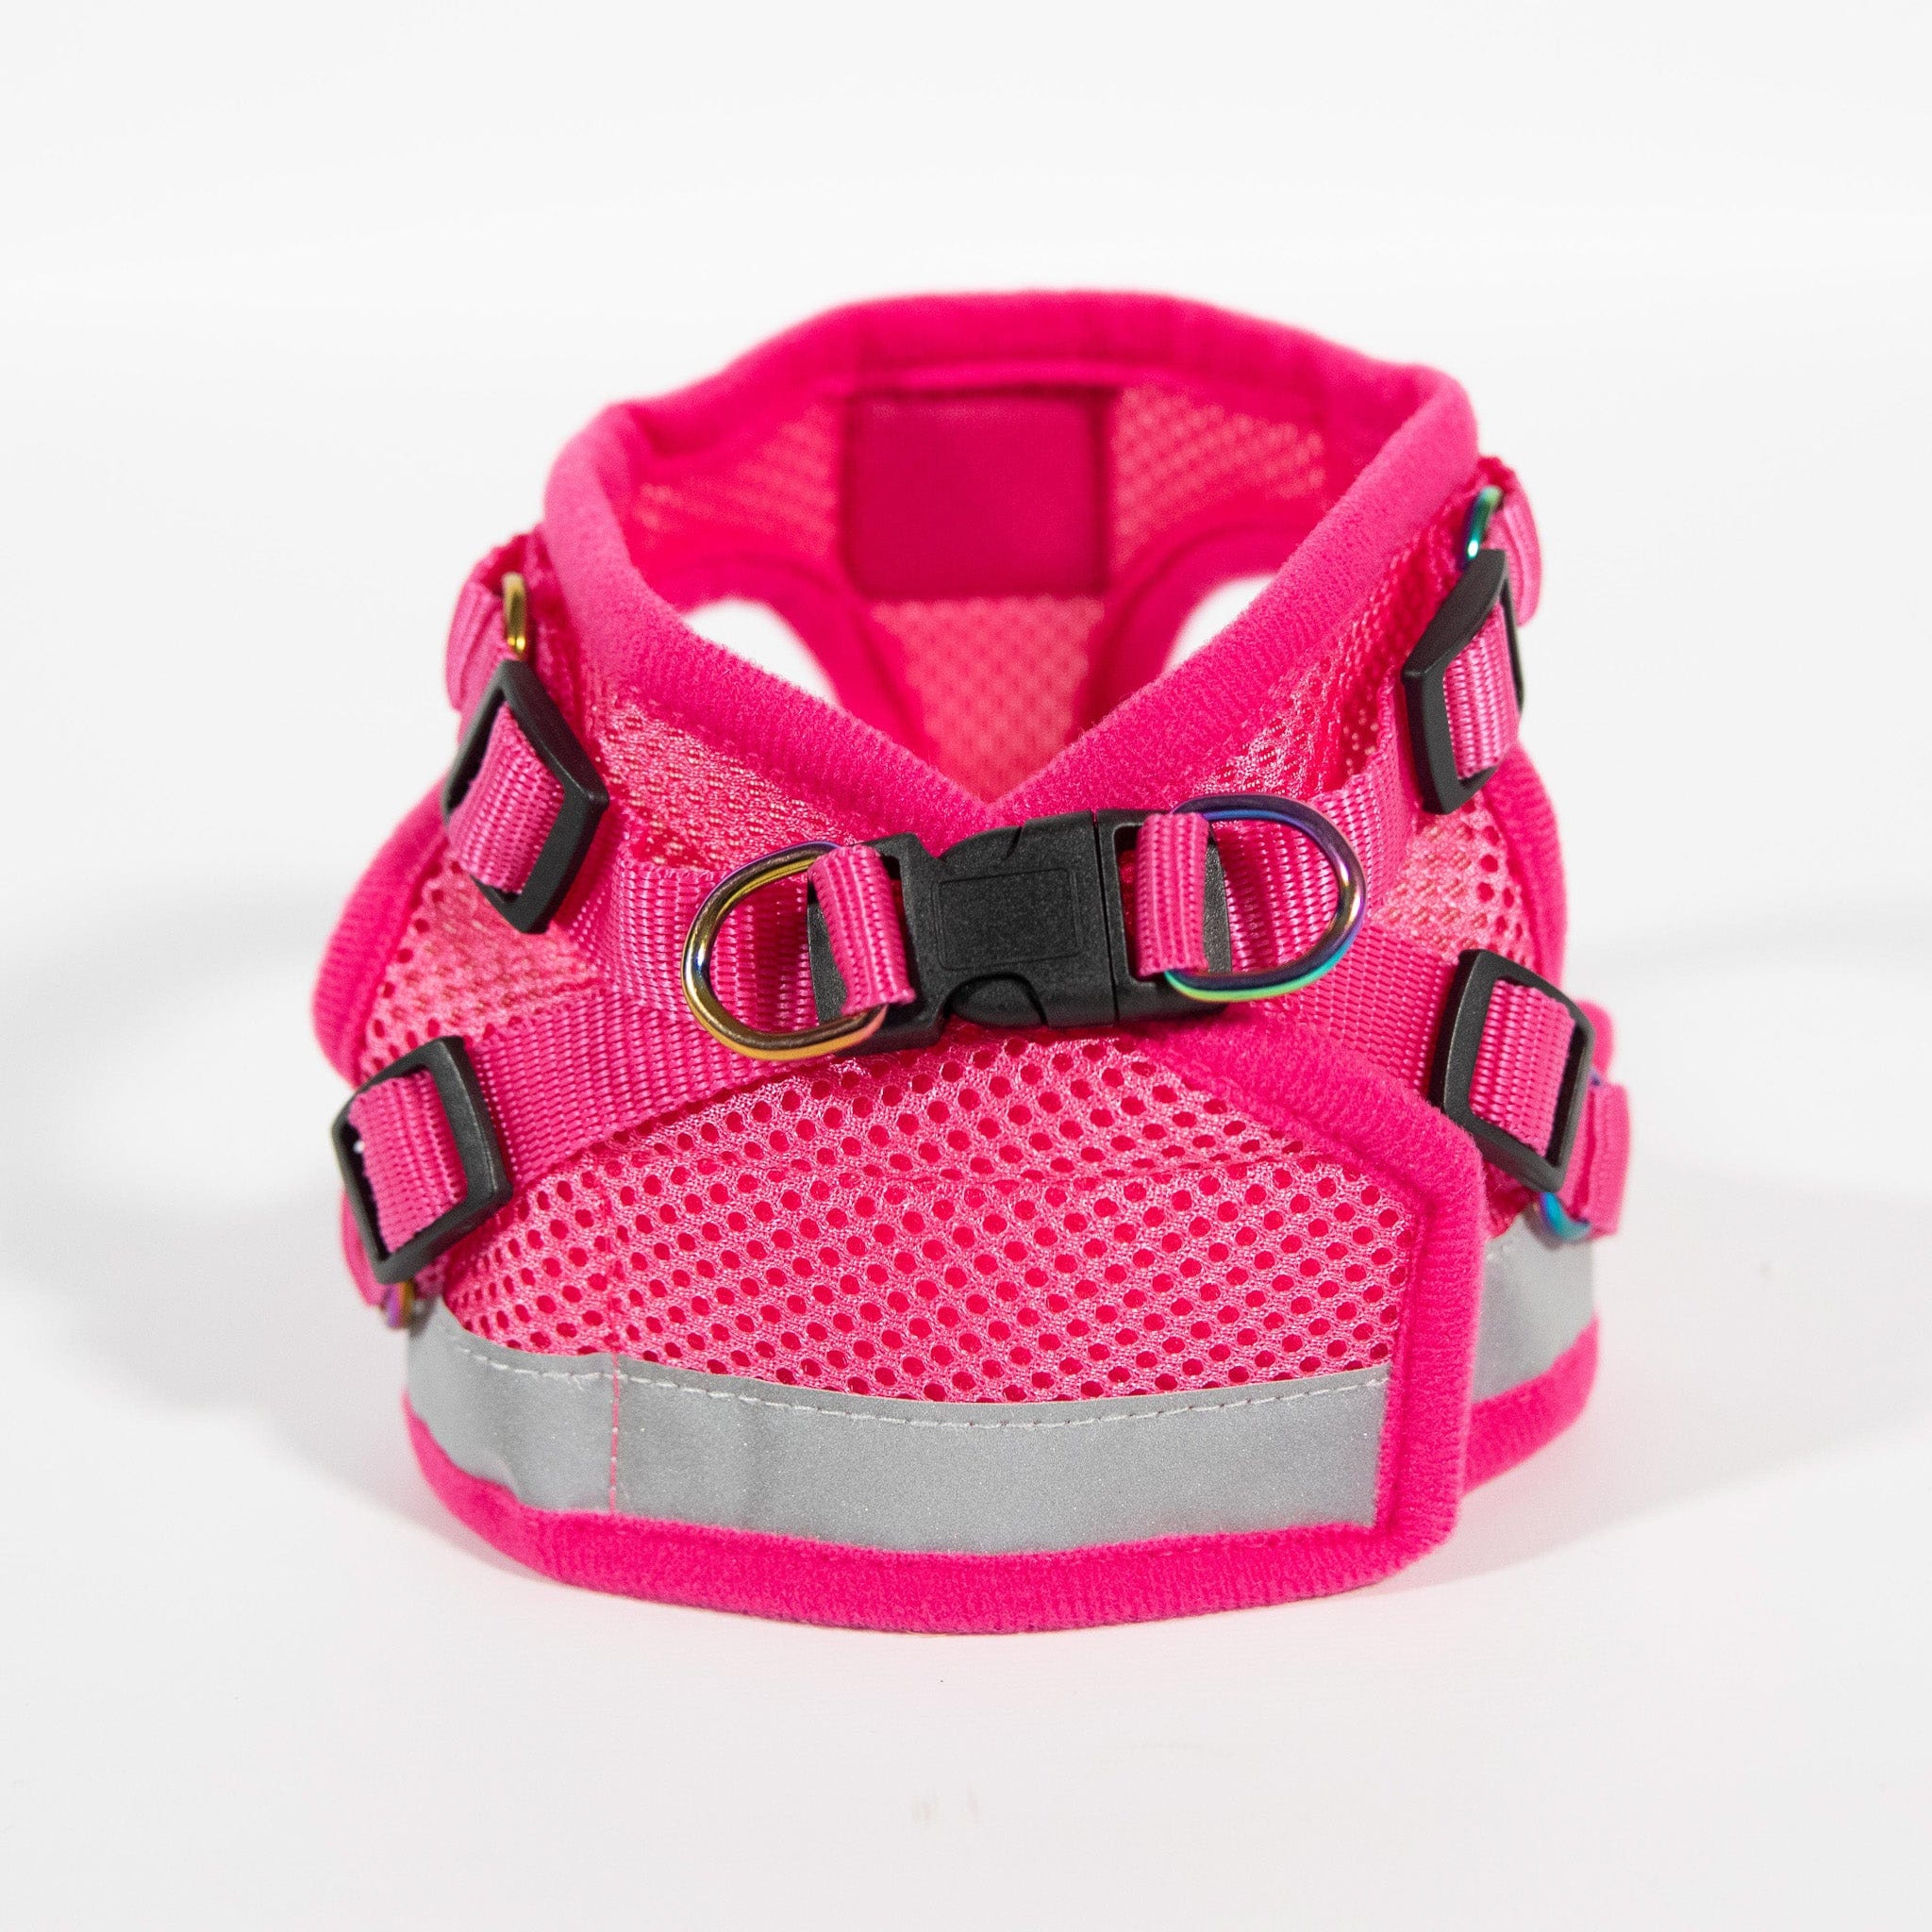 "The Purrfectly Pink" Iridescent Limited-Edition Harness & Leash Set